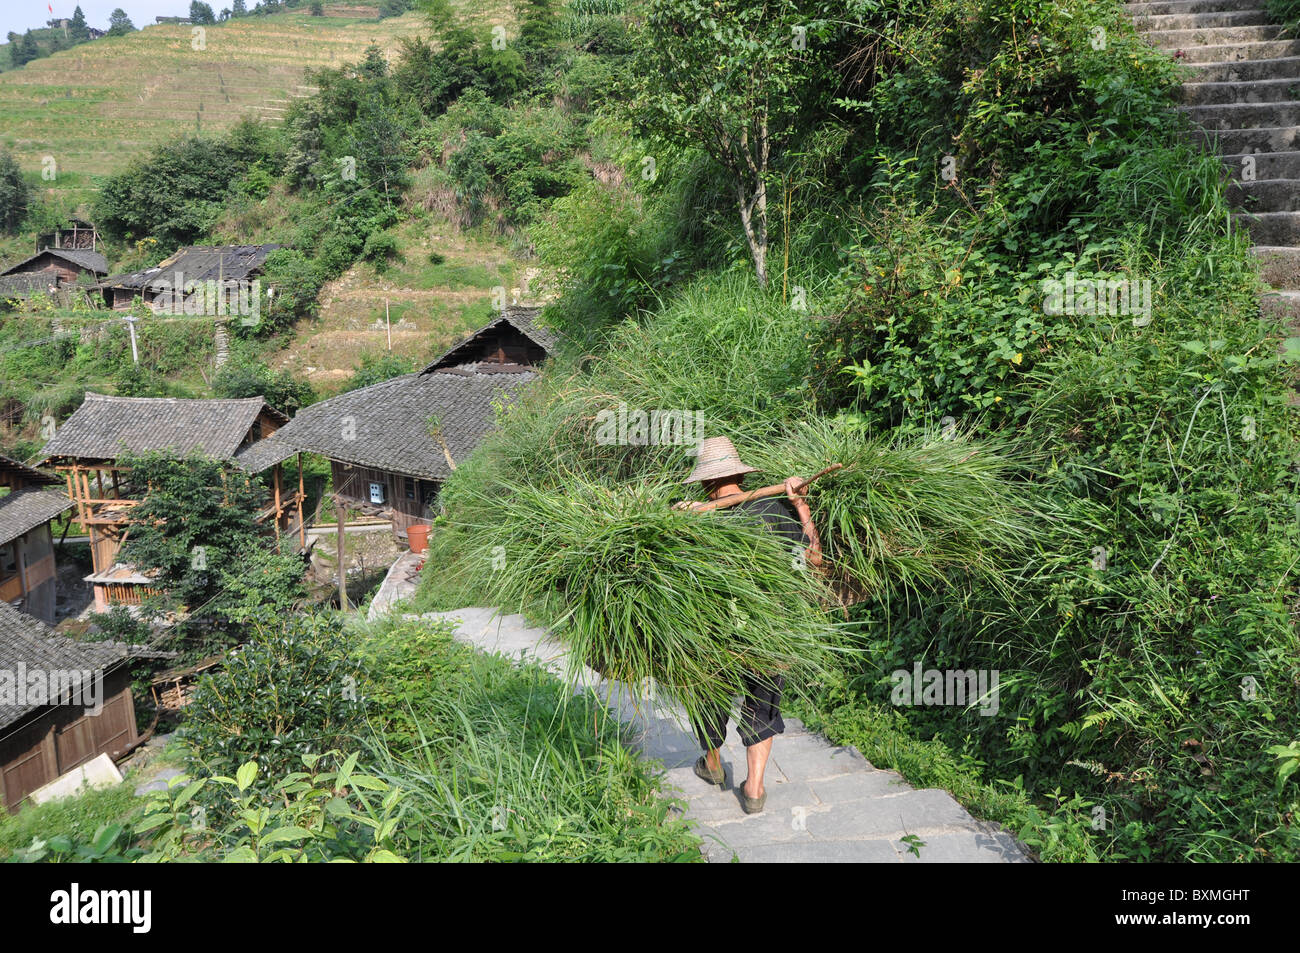 Chinese person on the way to work on the Longji rice terraces, Southern China Stock Photo